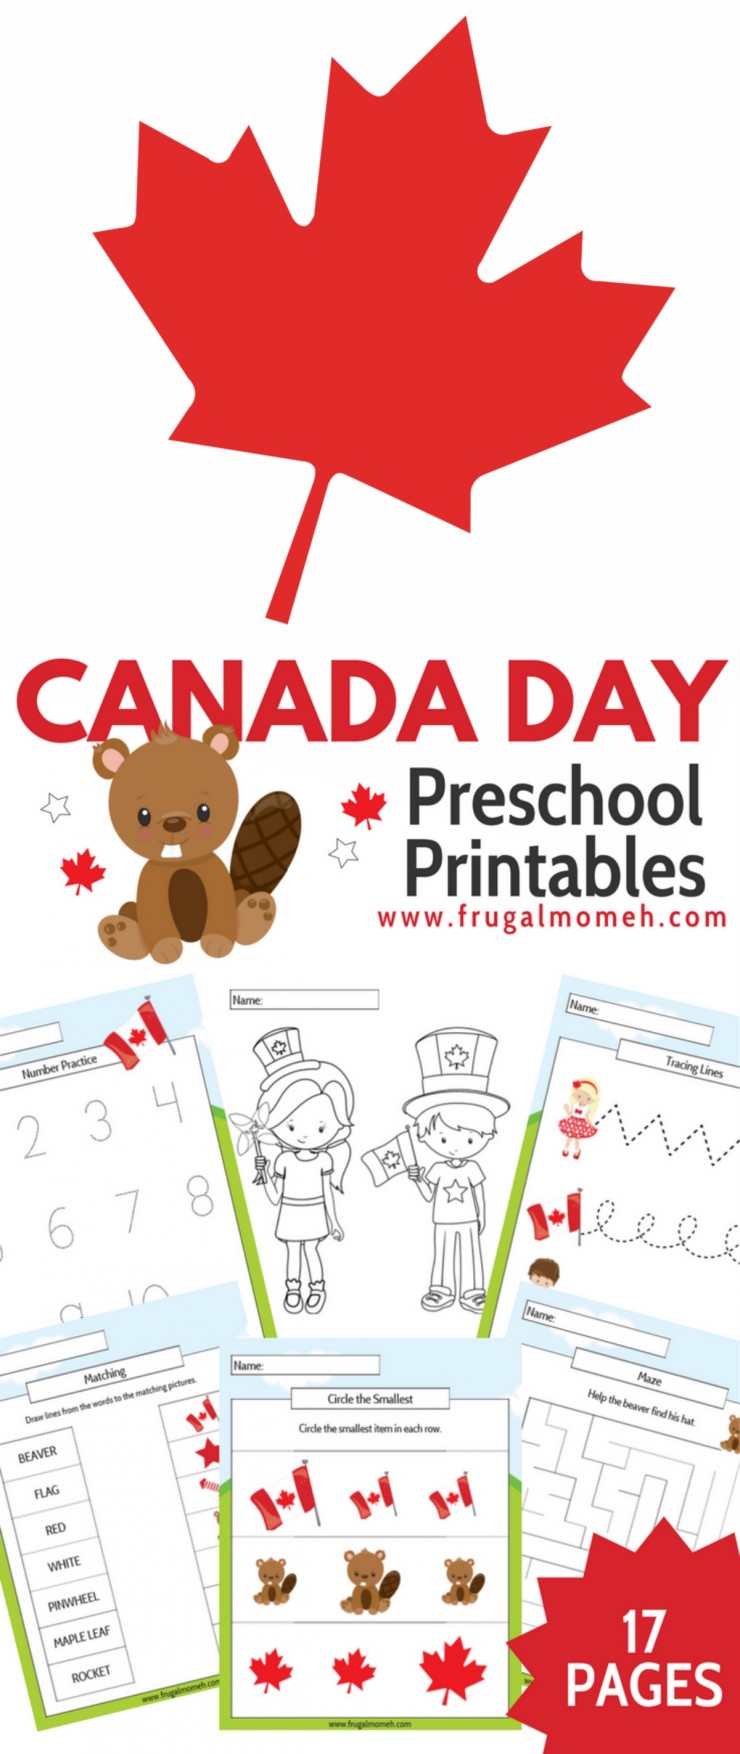 17 Fun Pages of printable Canada Day themed worksheets (for Pre-Kindergarten to Grade 1 aged kids!) You are going to love this Free Printable Canada Day Preschool Activity Book for kids.